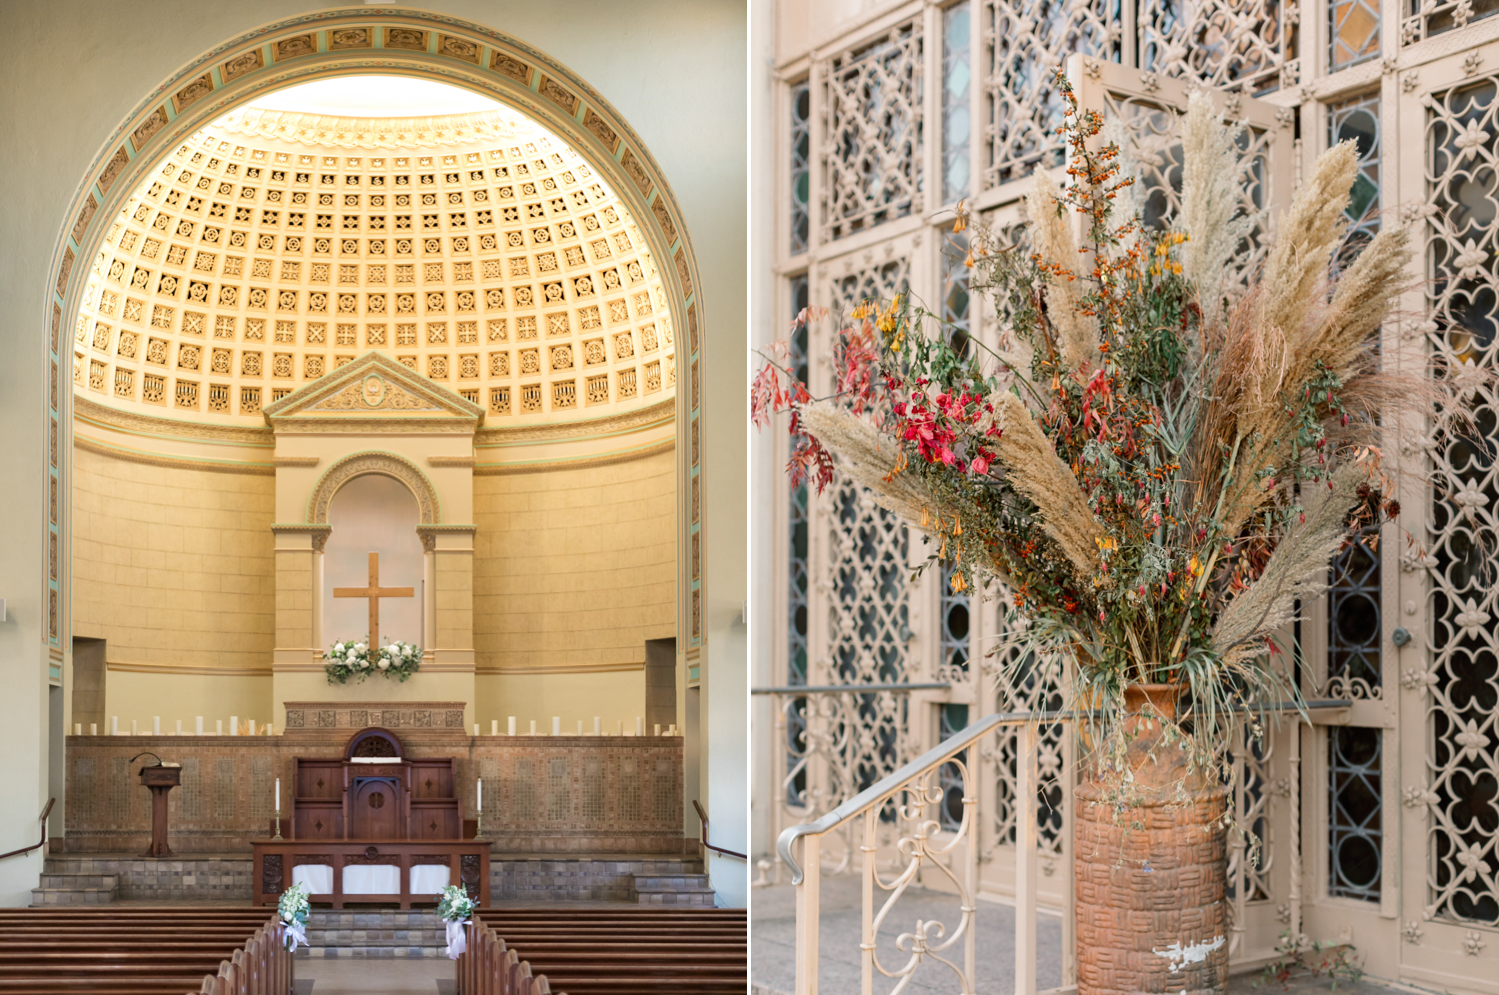 The church altar and a floral arrangement outside the front doors